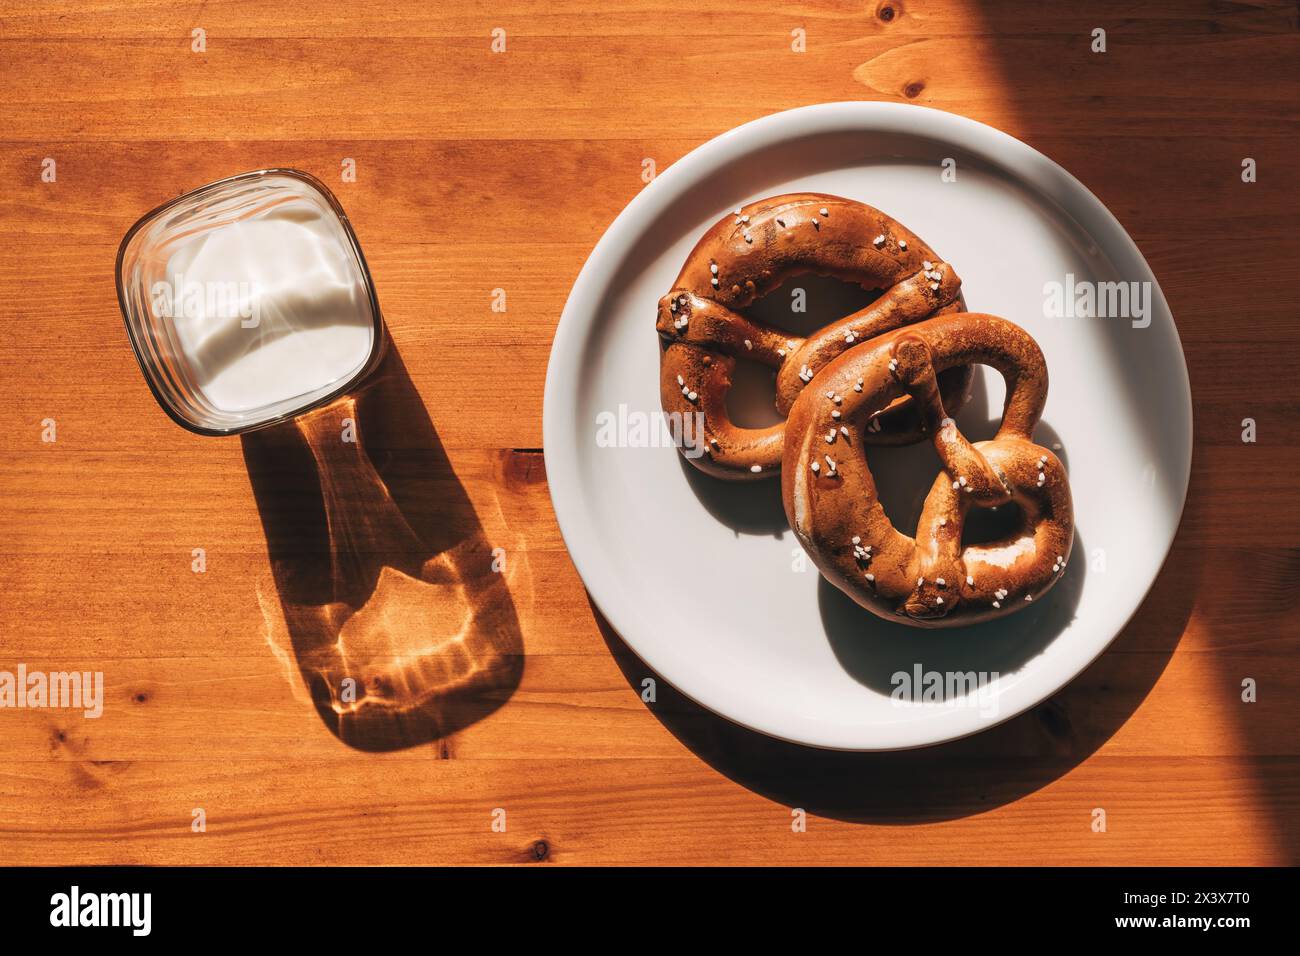 Two pretzels on a plate and a glass of yogurt on the table in the morning is perfect breakfast, top view Stock Photo